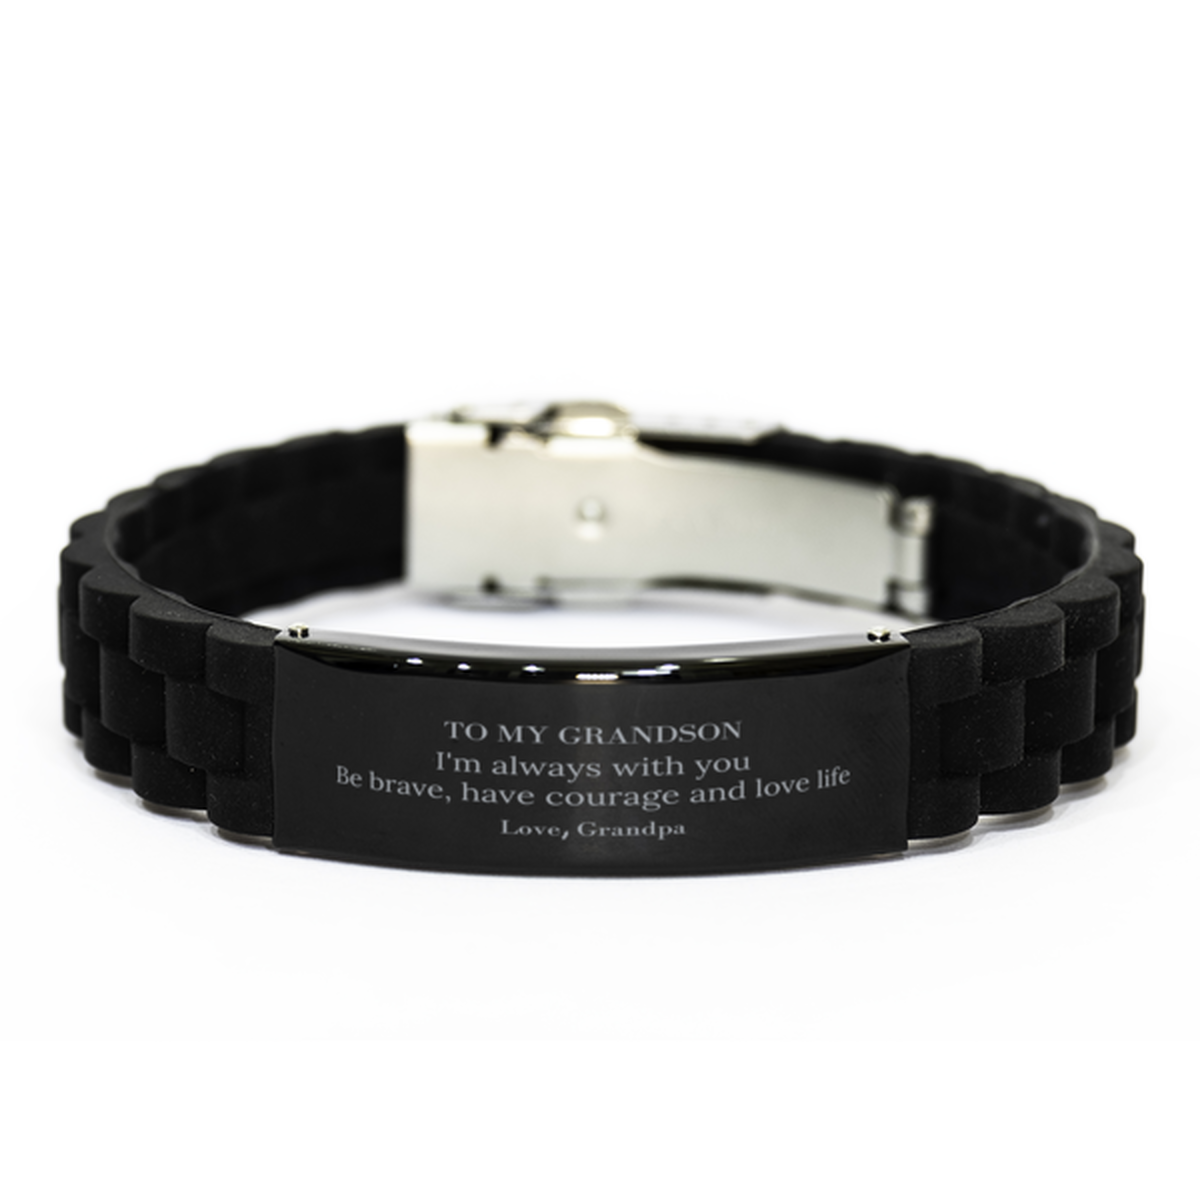 To My Grandson Gifts from Grandpa, Unique Black Glidelock Clasp Bracelet Inspirational Christmas Birthday Graduation Gifts for Grandson I'm always with you. Be brave, have courage and love life. Love, Grandpa